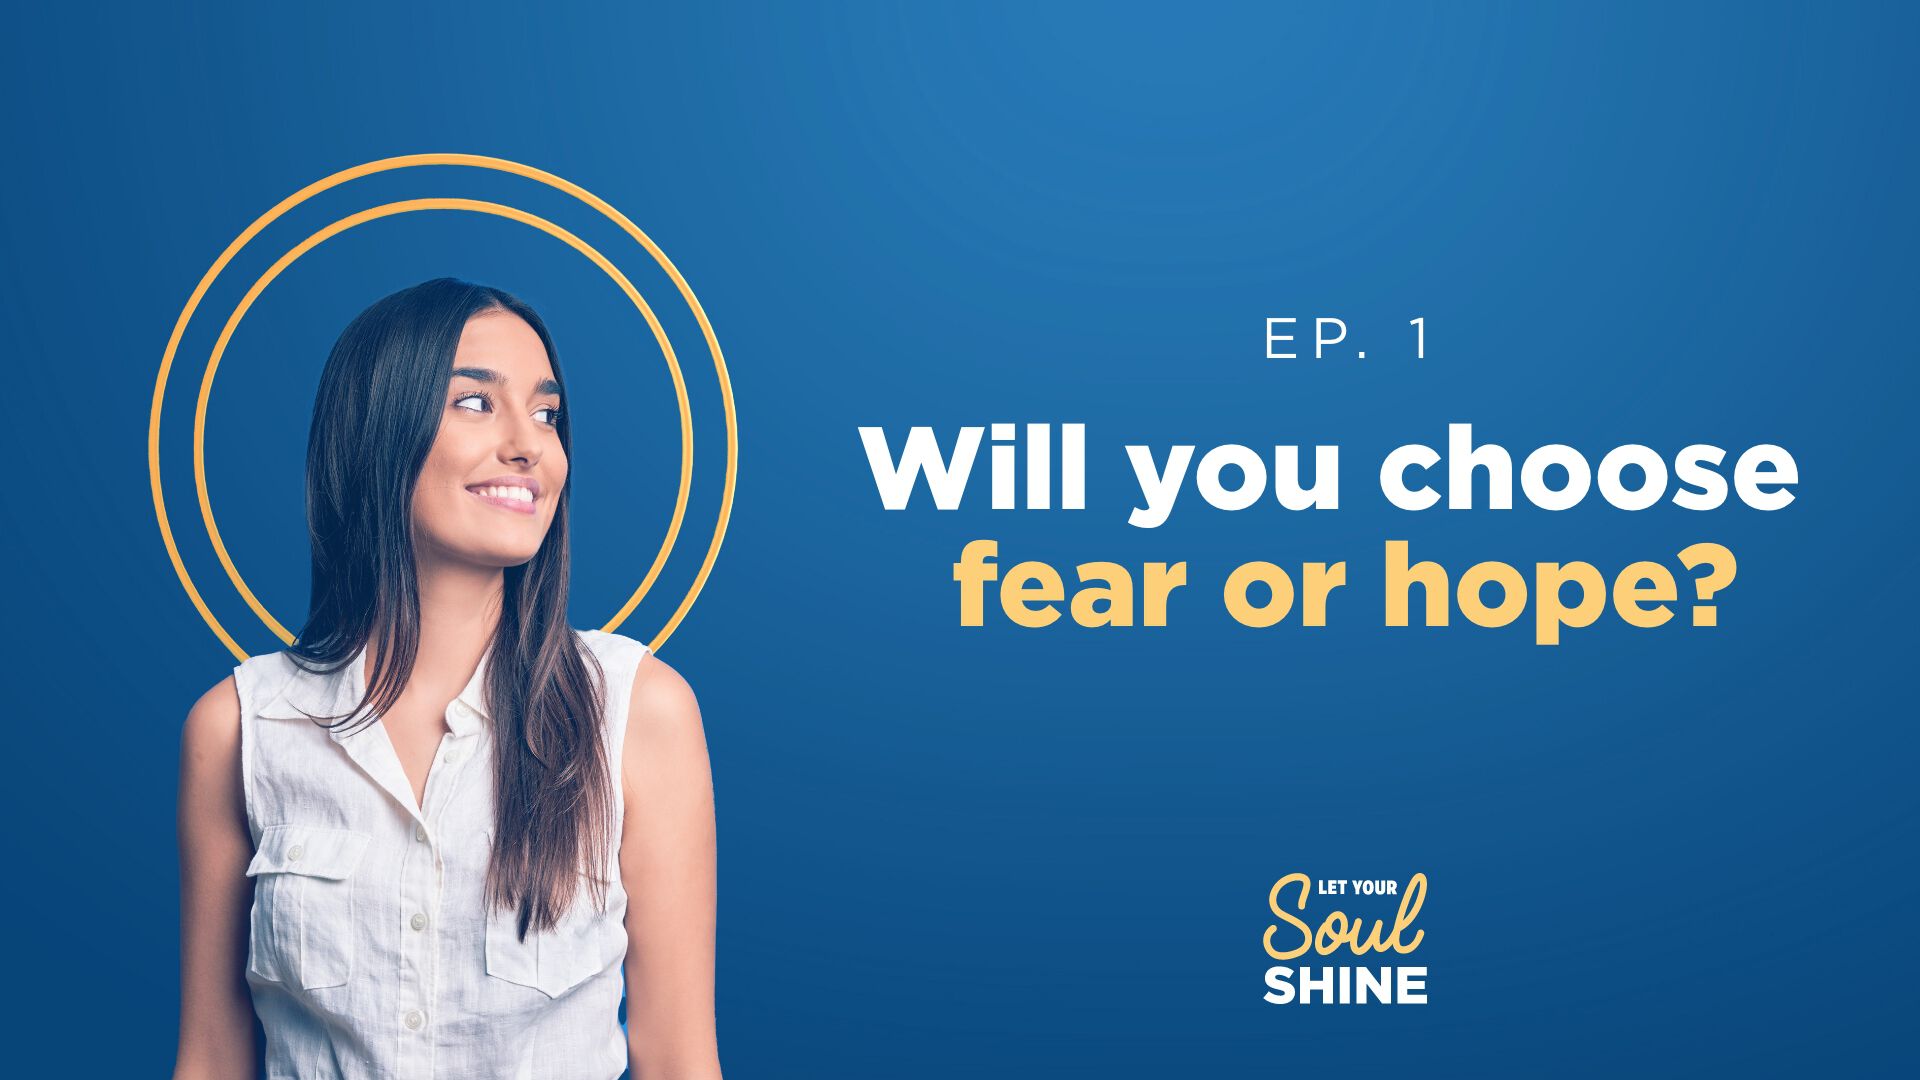 Will you choose fear or hope?